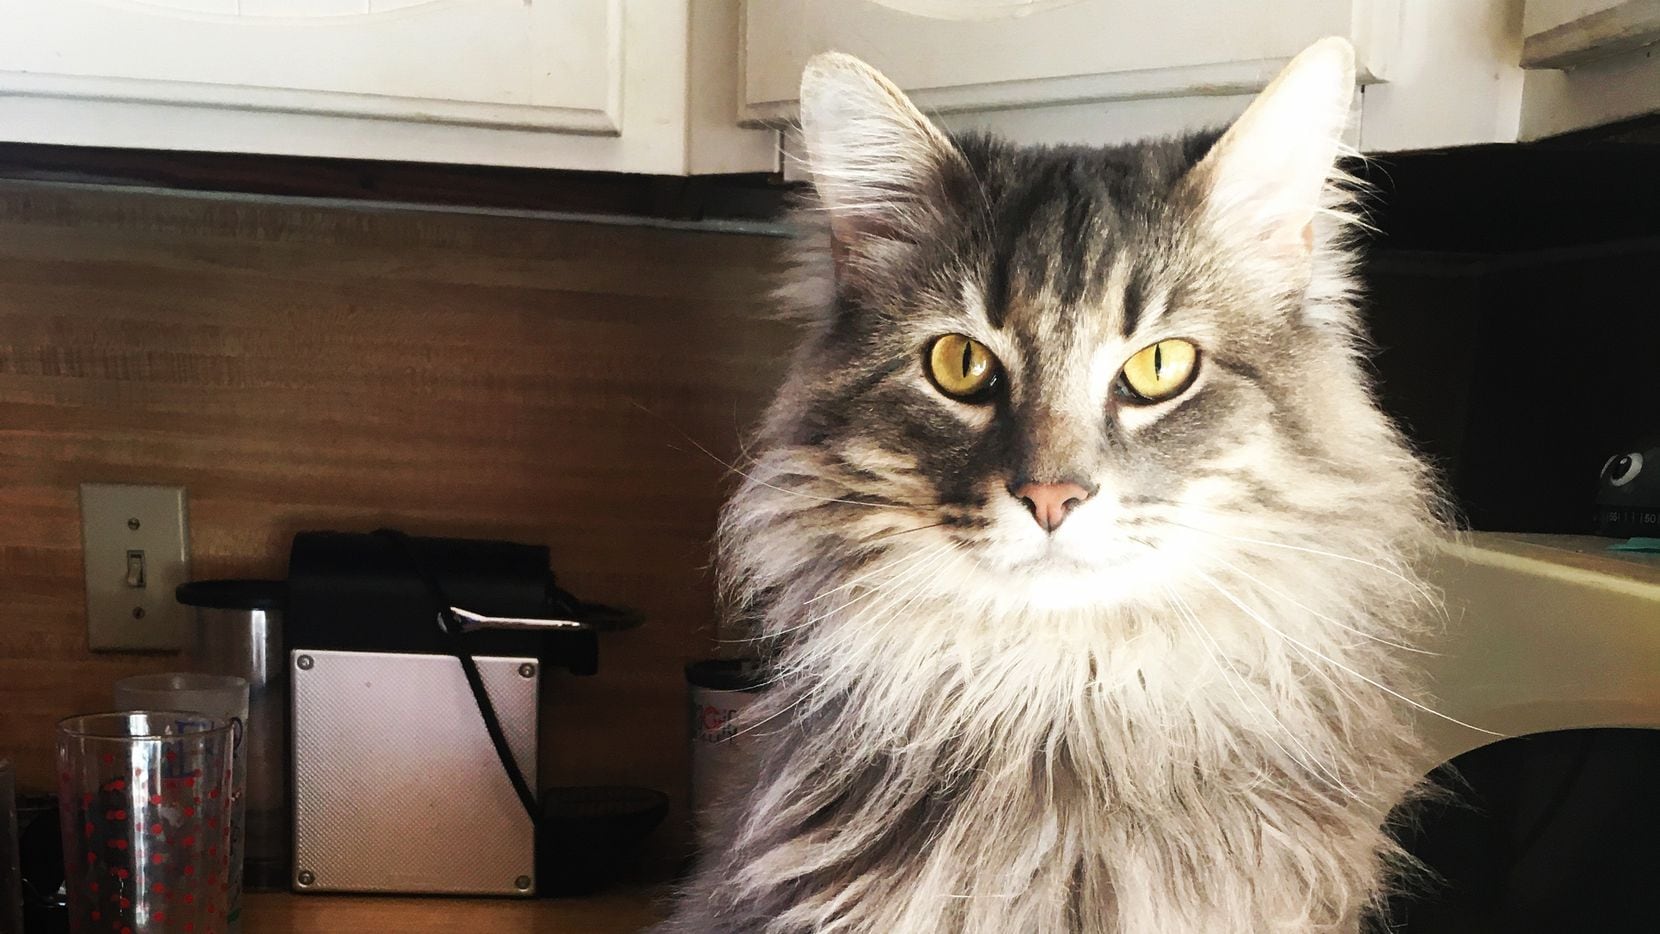 Wallace the cat belongs to Dallas author Sarah Hepola and they are spending significantly more time together, Hepola says, with perhaps mixed results for Wallace.